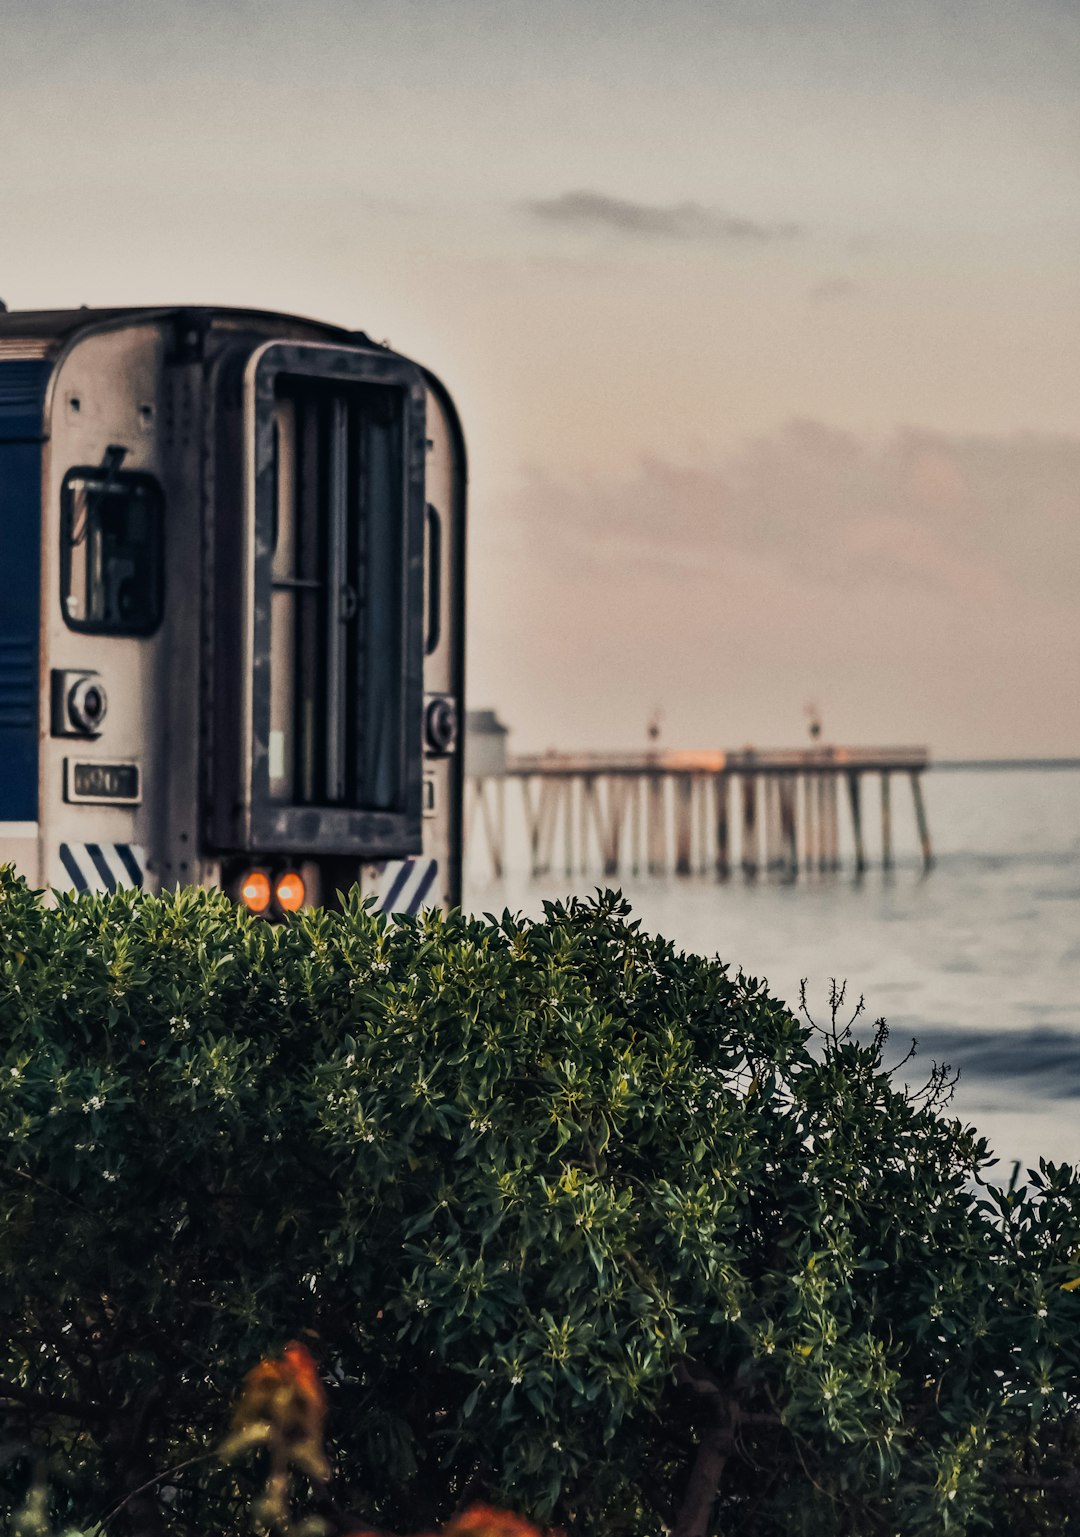 gray train on rail near body of water during daytime